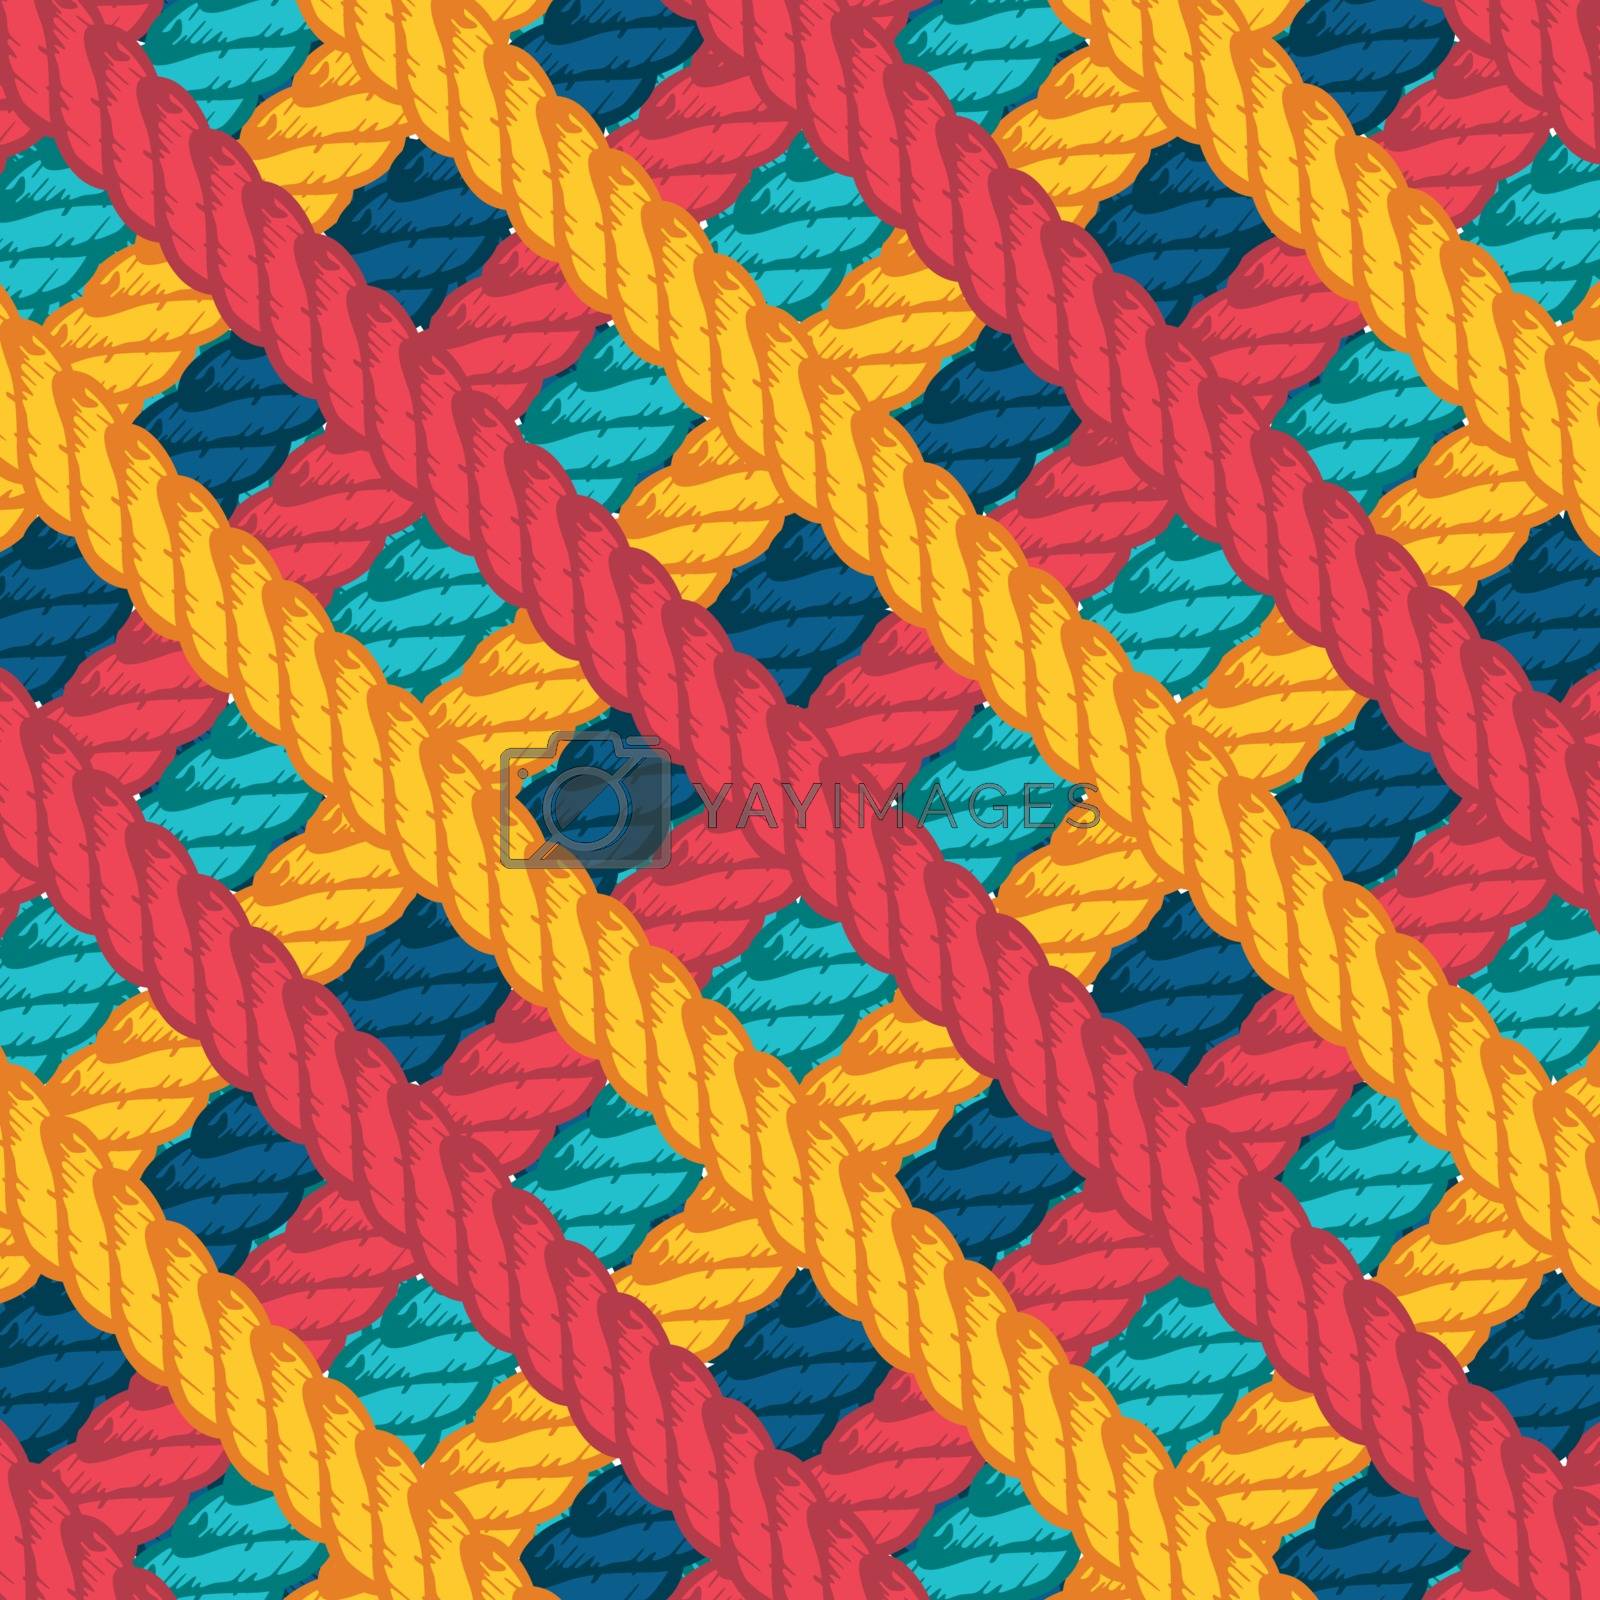 Royalty free image of lasso rope vector pattern background wallpaper by vector1st